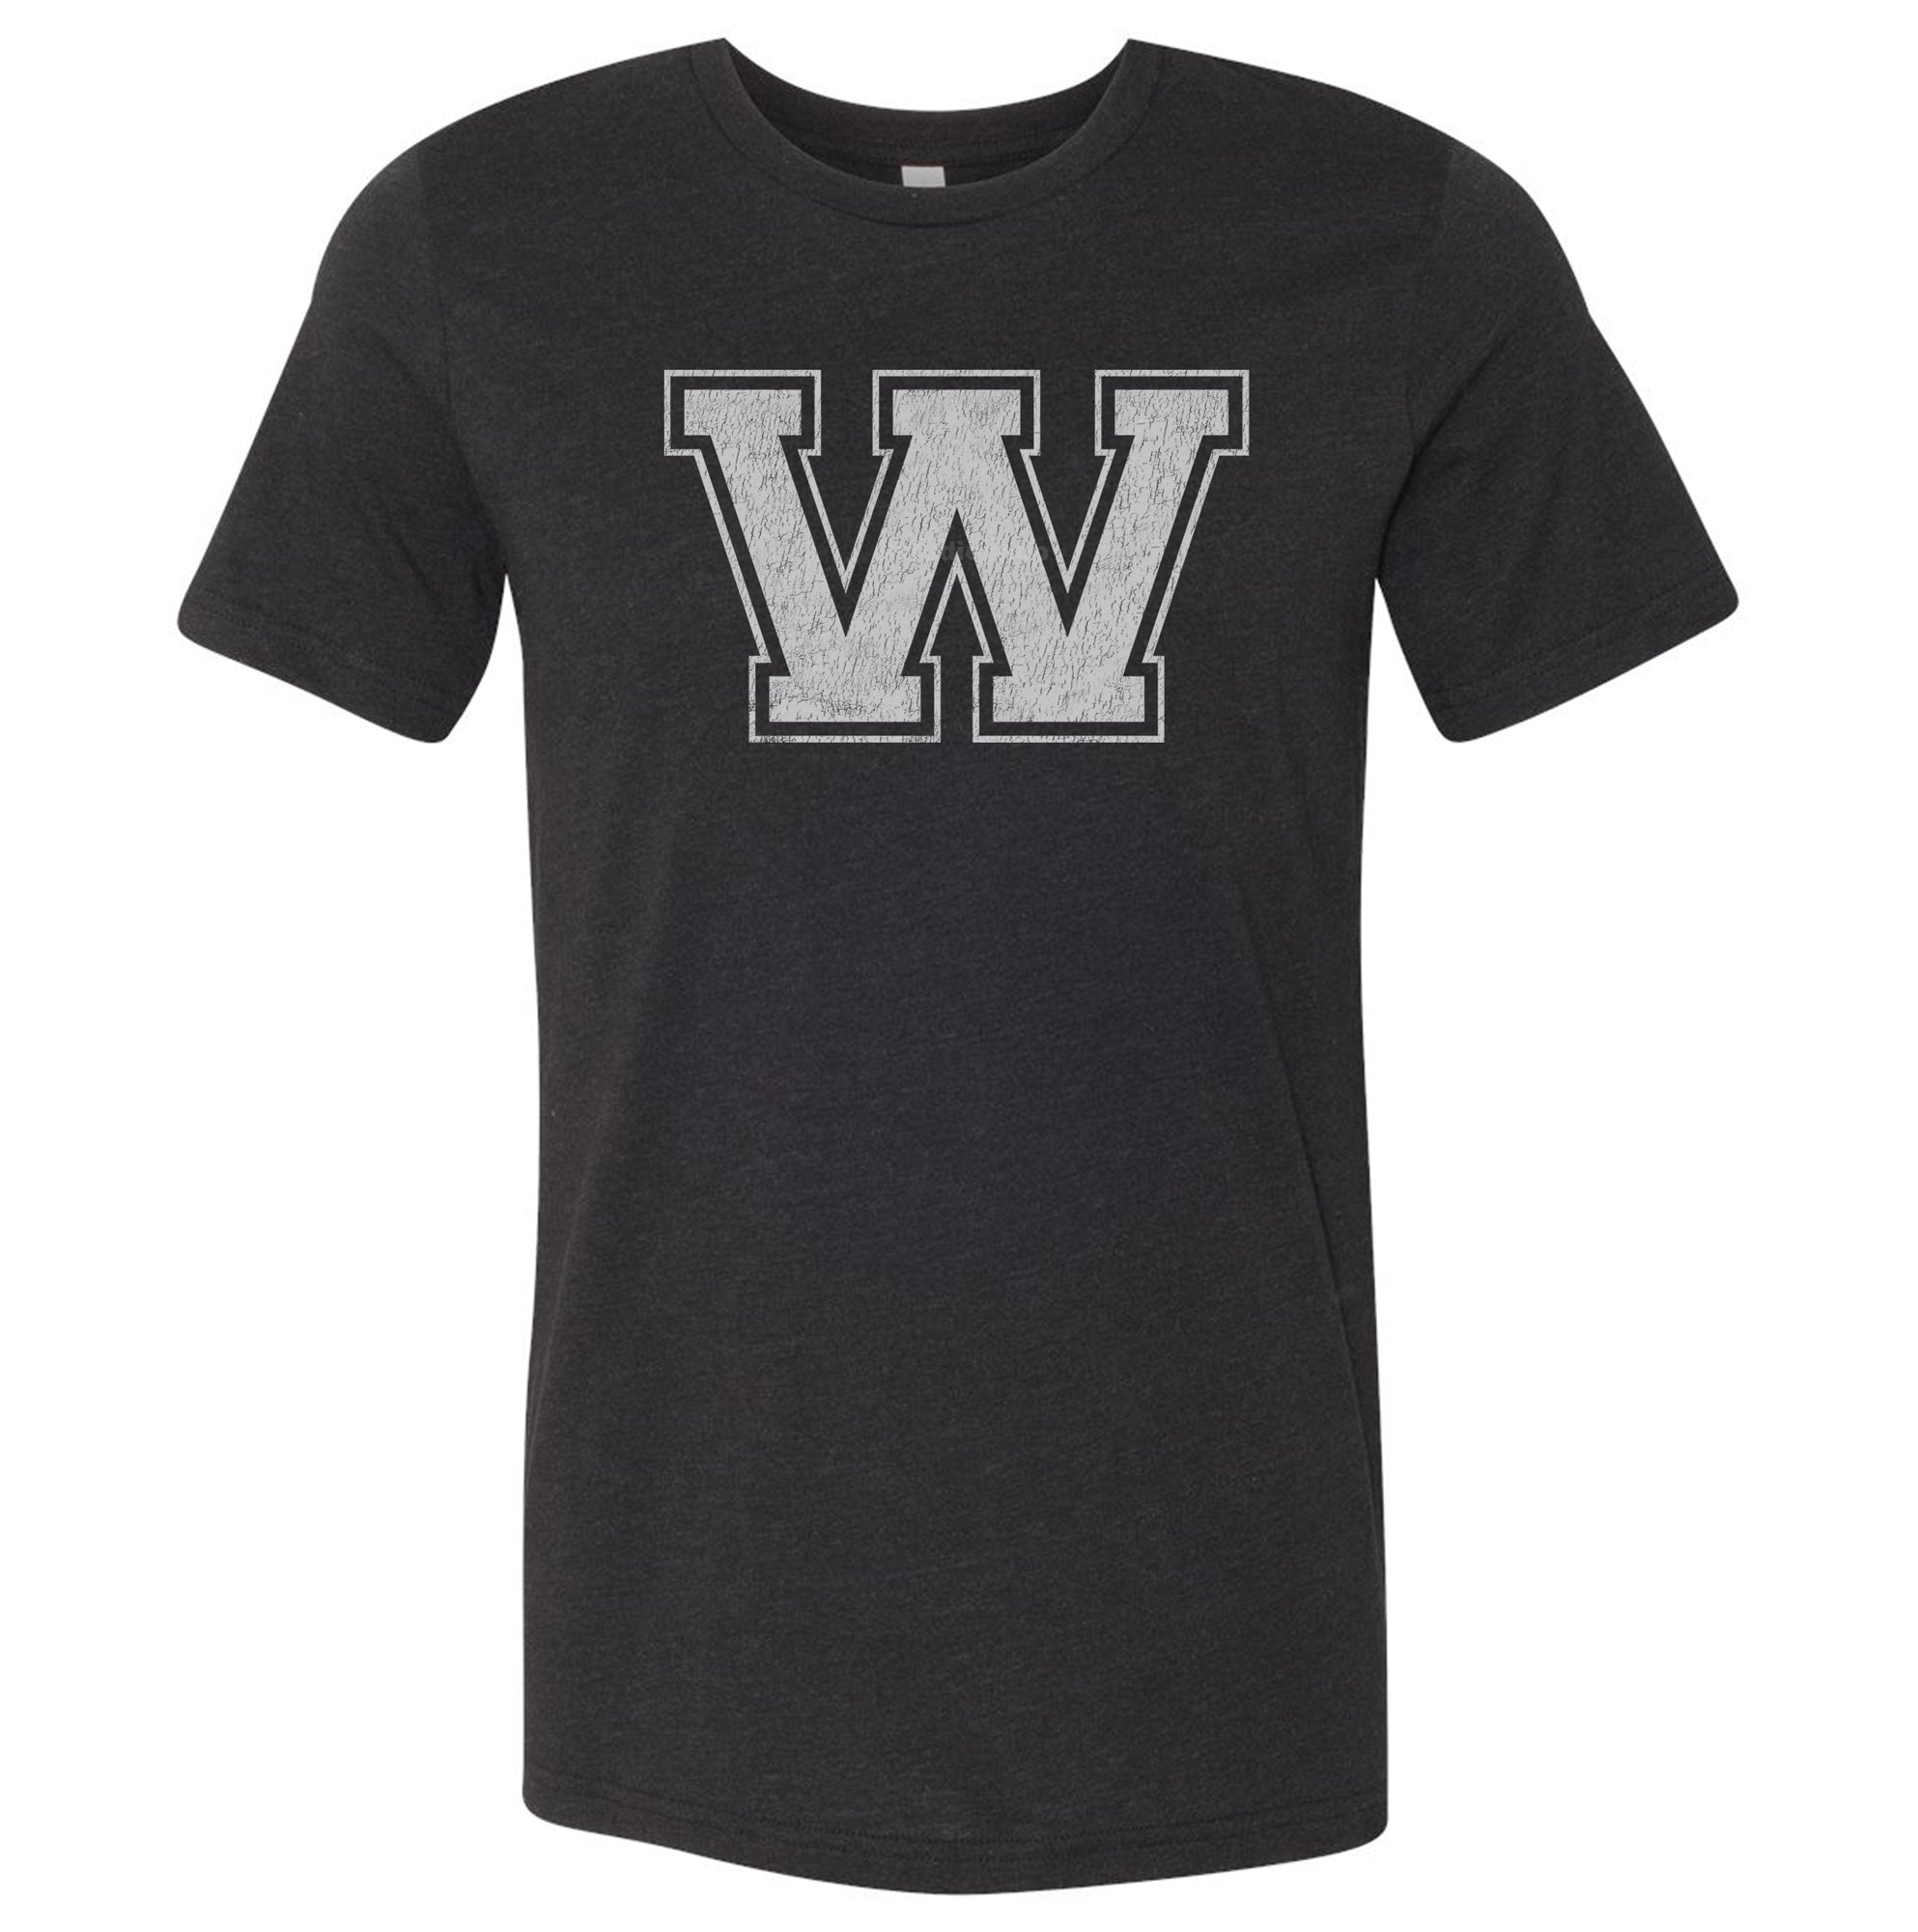 "W" - Vintage - Blended Youth Tee